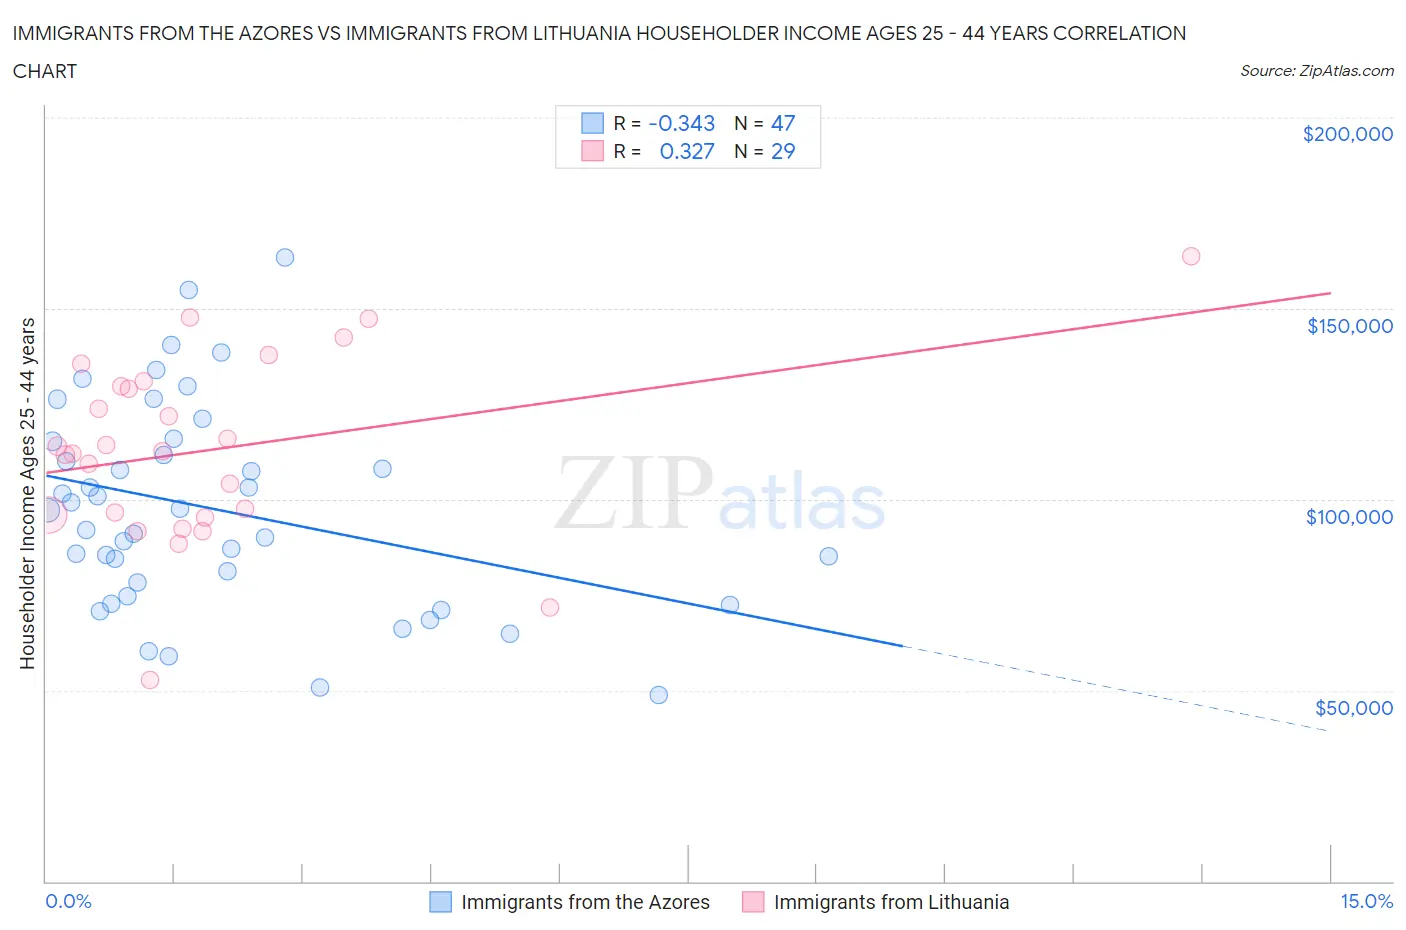 Immigrants from the Azores vs Immigrants from Lithuania Householder Income Ages 25 - 44 years